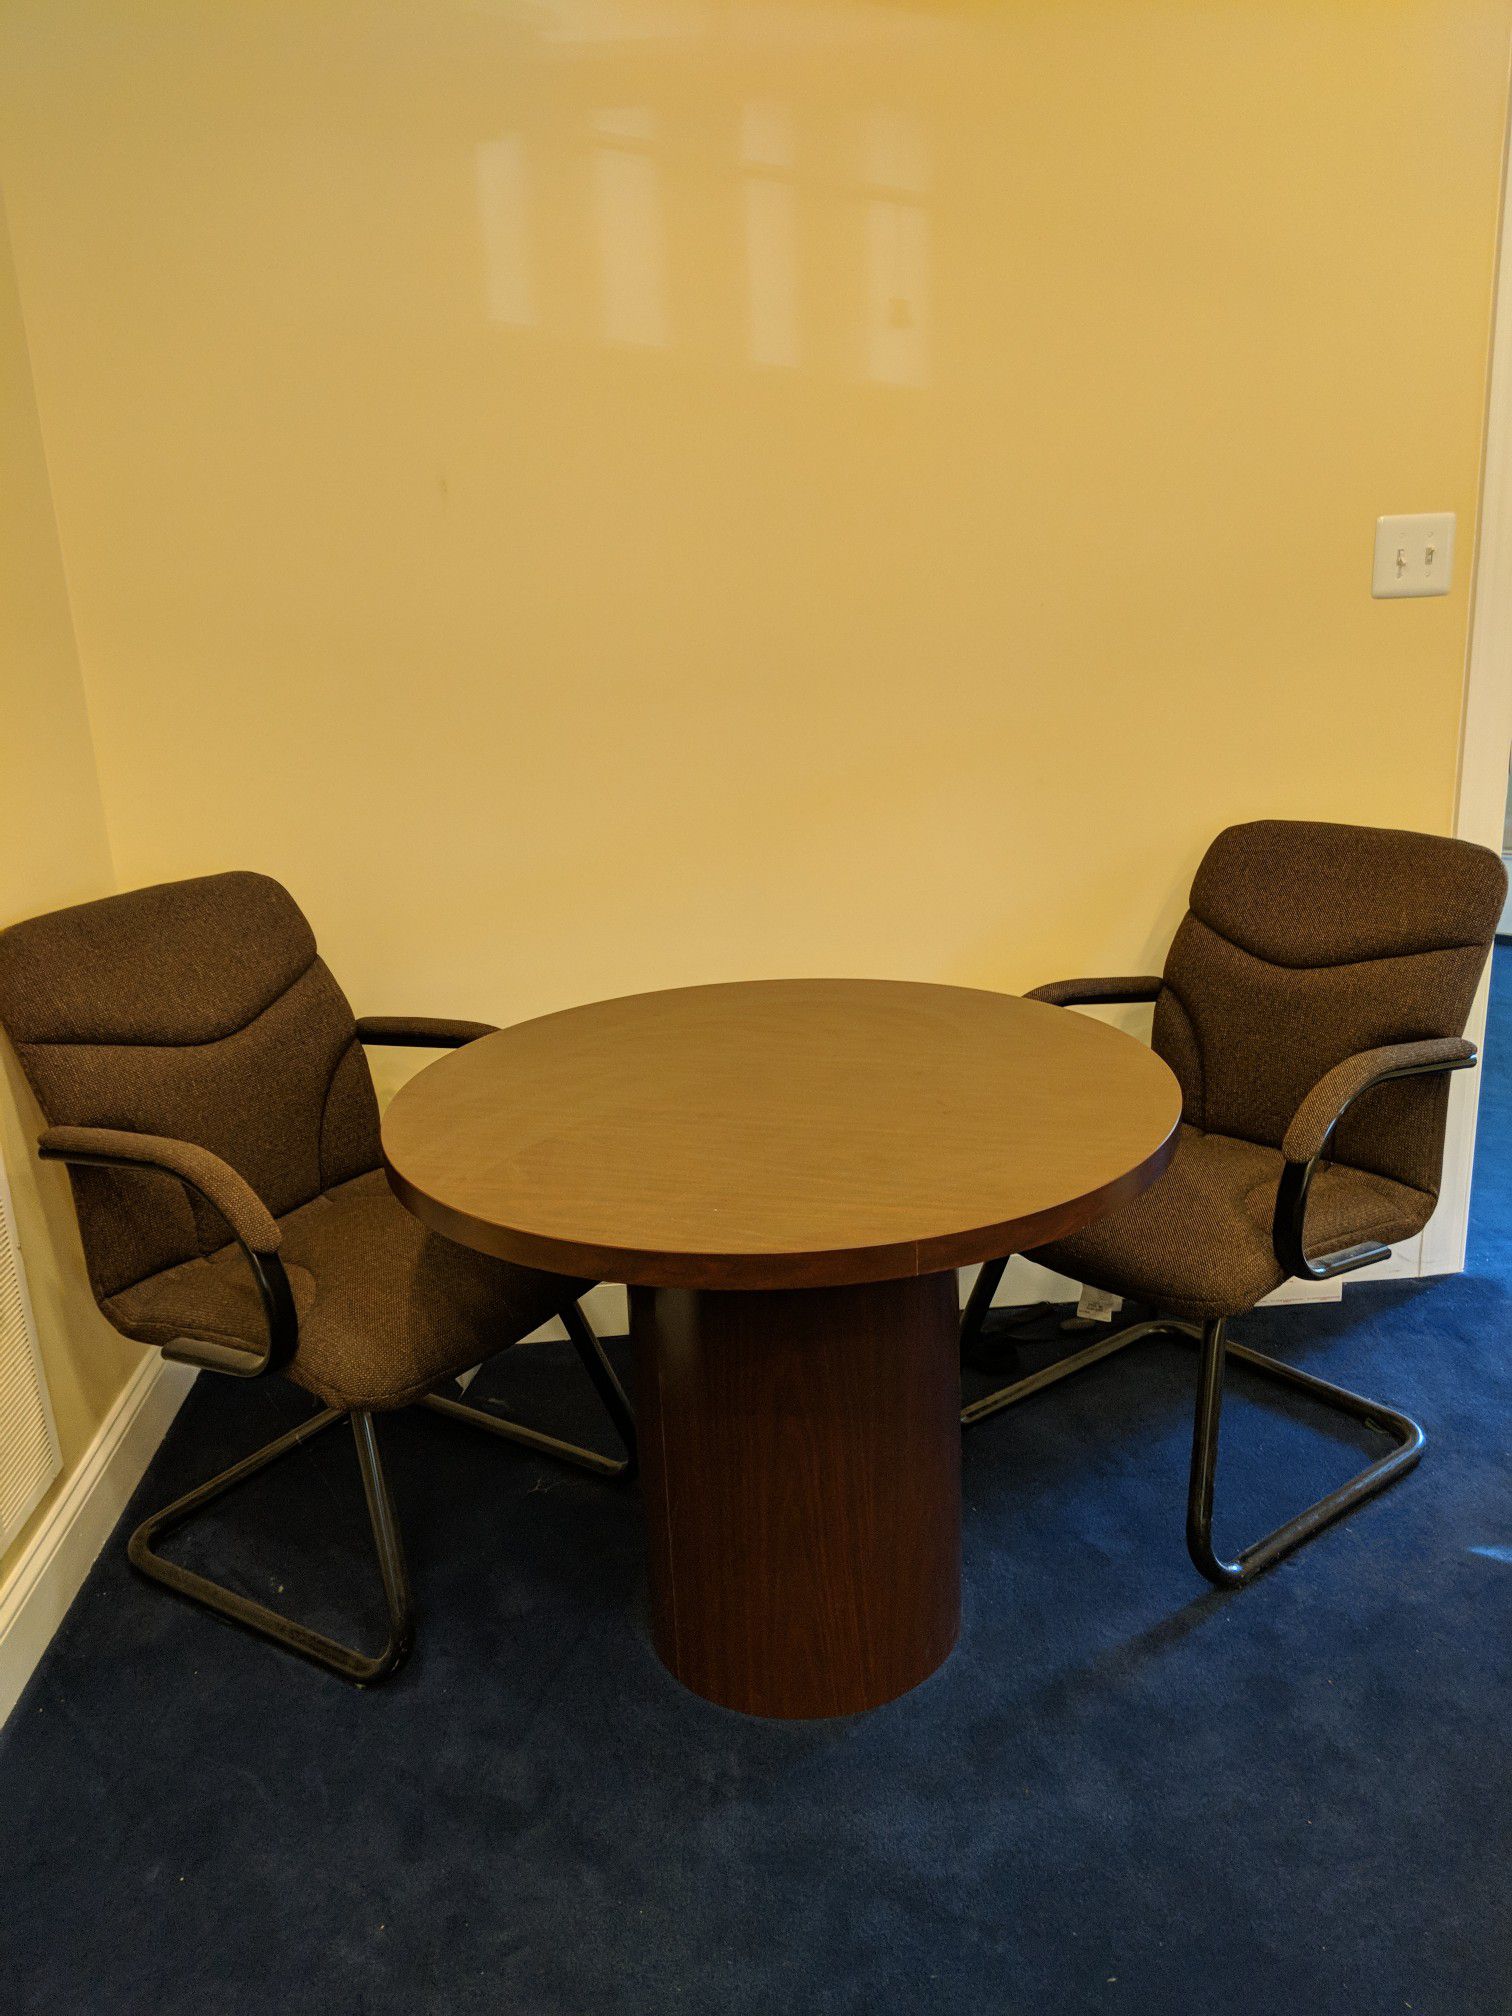 Round Meeting Table And Chair Set